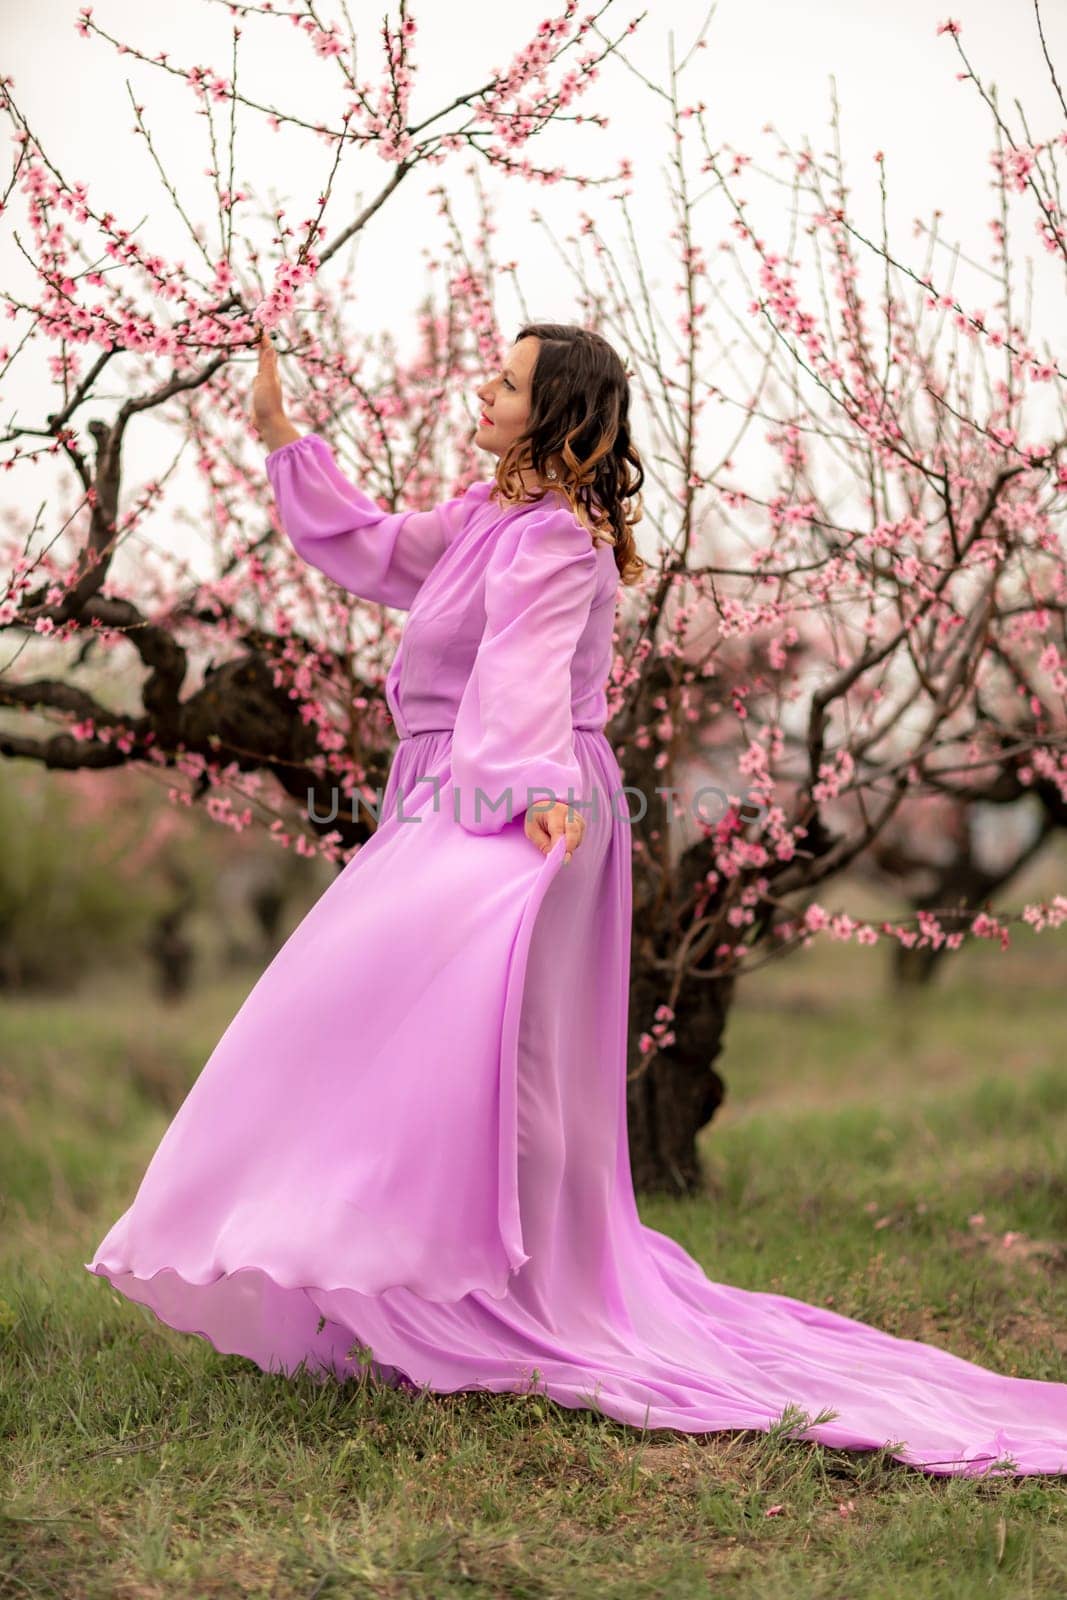 Woman peach blossom. Happy curly woman in pink dress walking in the garden of blossoming peach trees in spring.